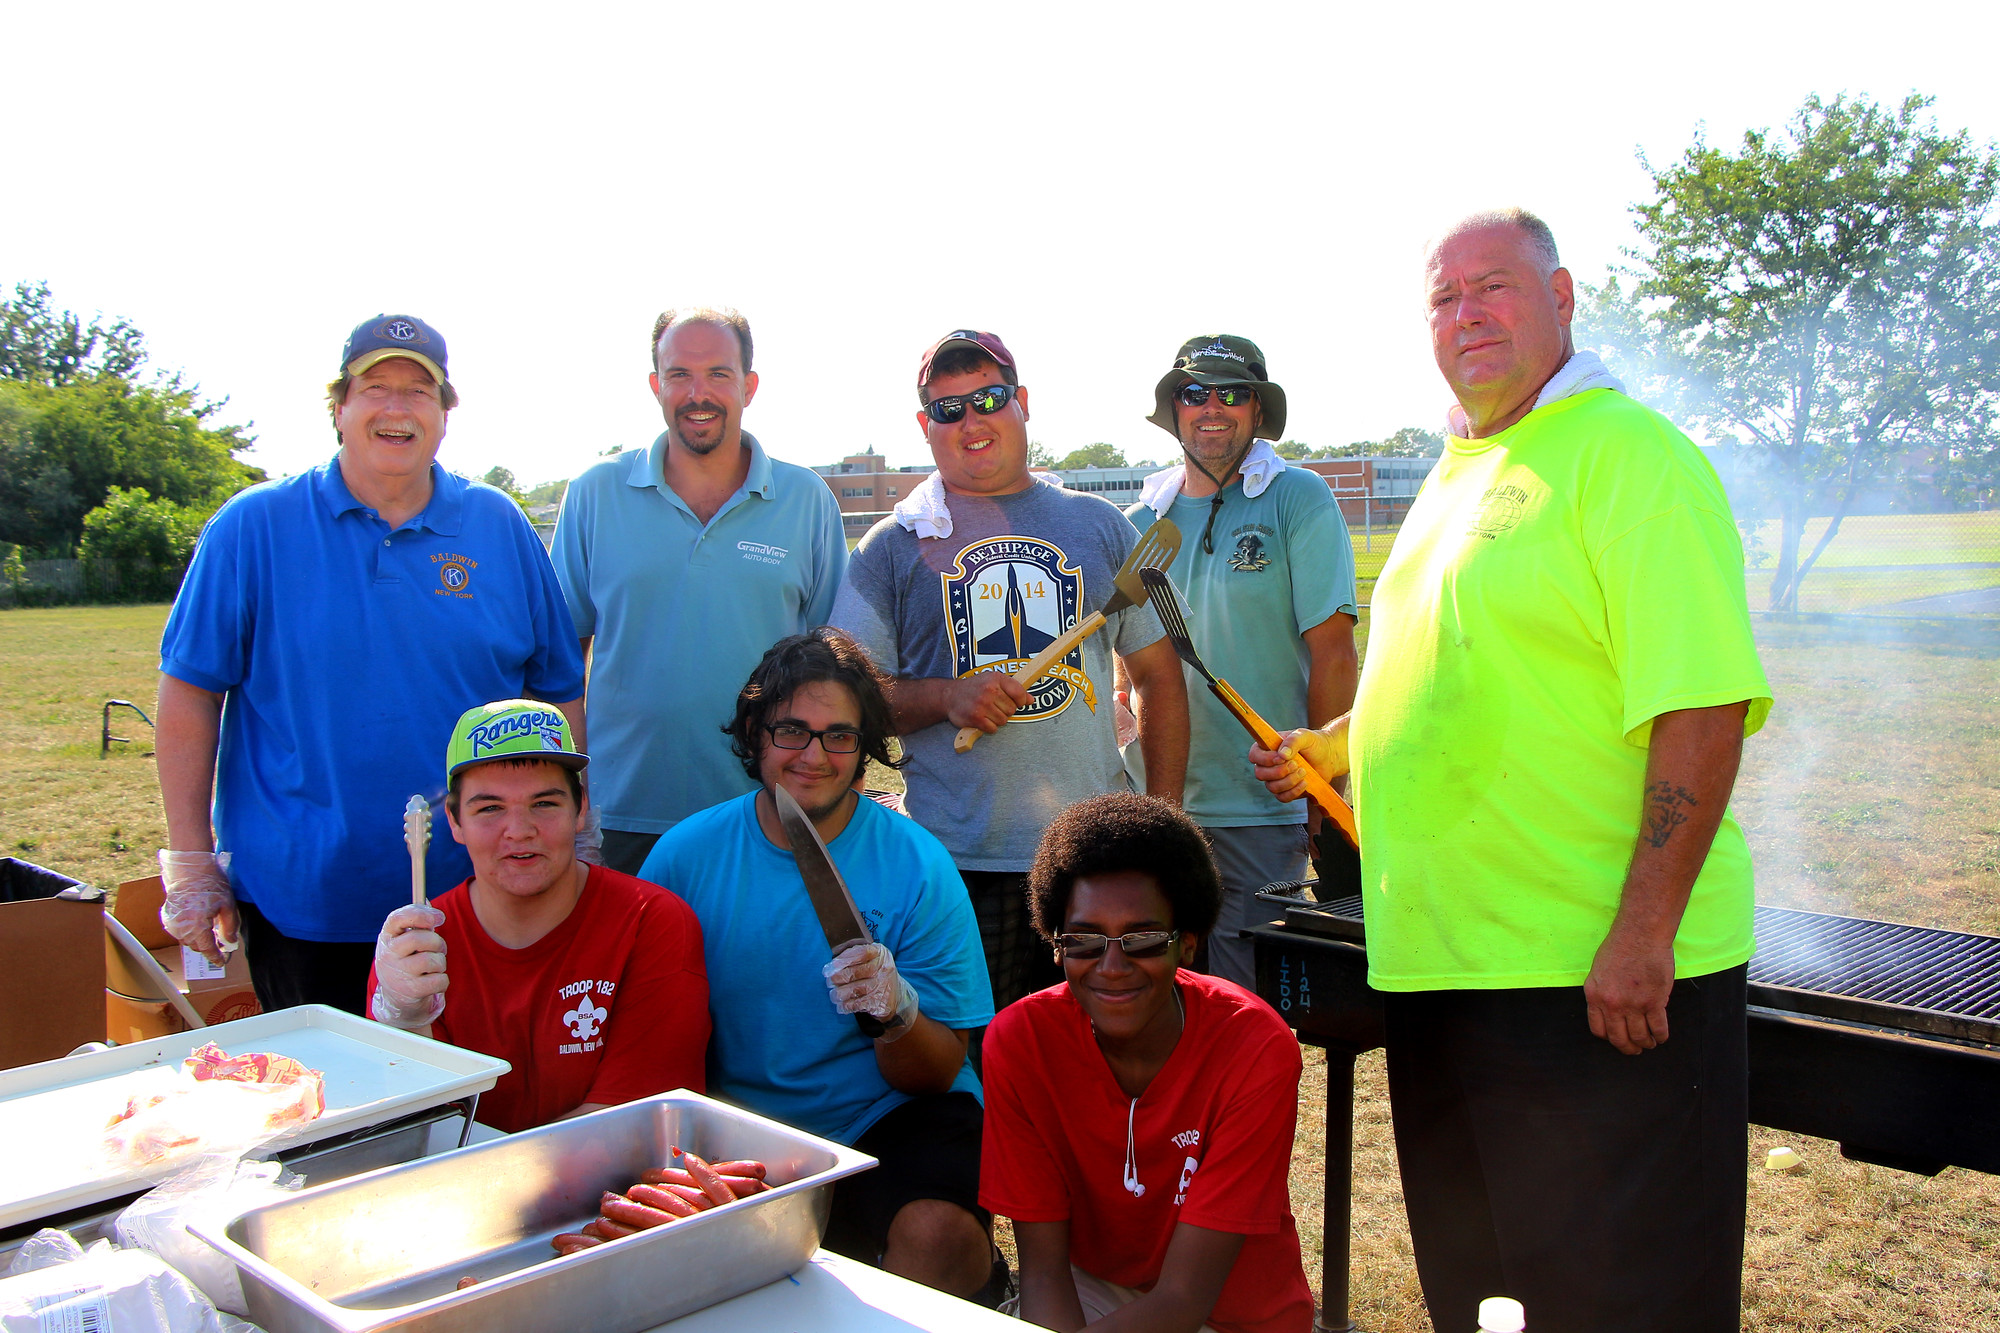 Volunteers served up more than 1,800 hot dogs and hamburgers during the Baldwin Chamber of Commerce Picnic in Baldwin Park. Back row from left were Tony Tarantino, Paul Lizio, Peter Ortiz, Bret Rose and Ralph Rose. From row from left were Brandon Louis, Gabriel Turnan and Kevin Meyers.